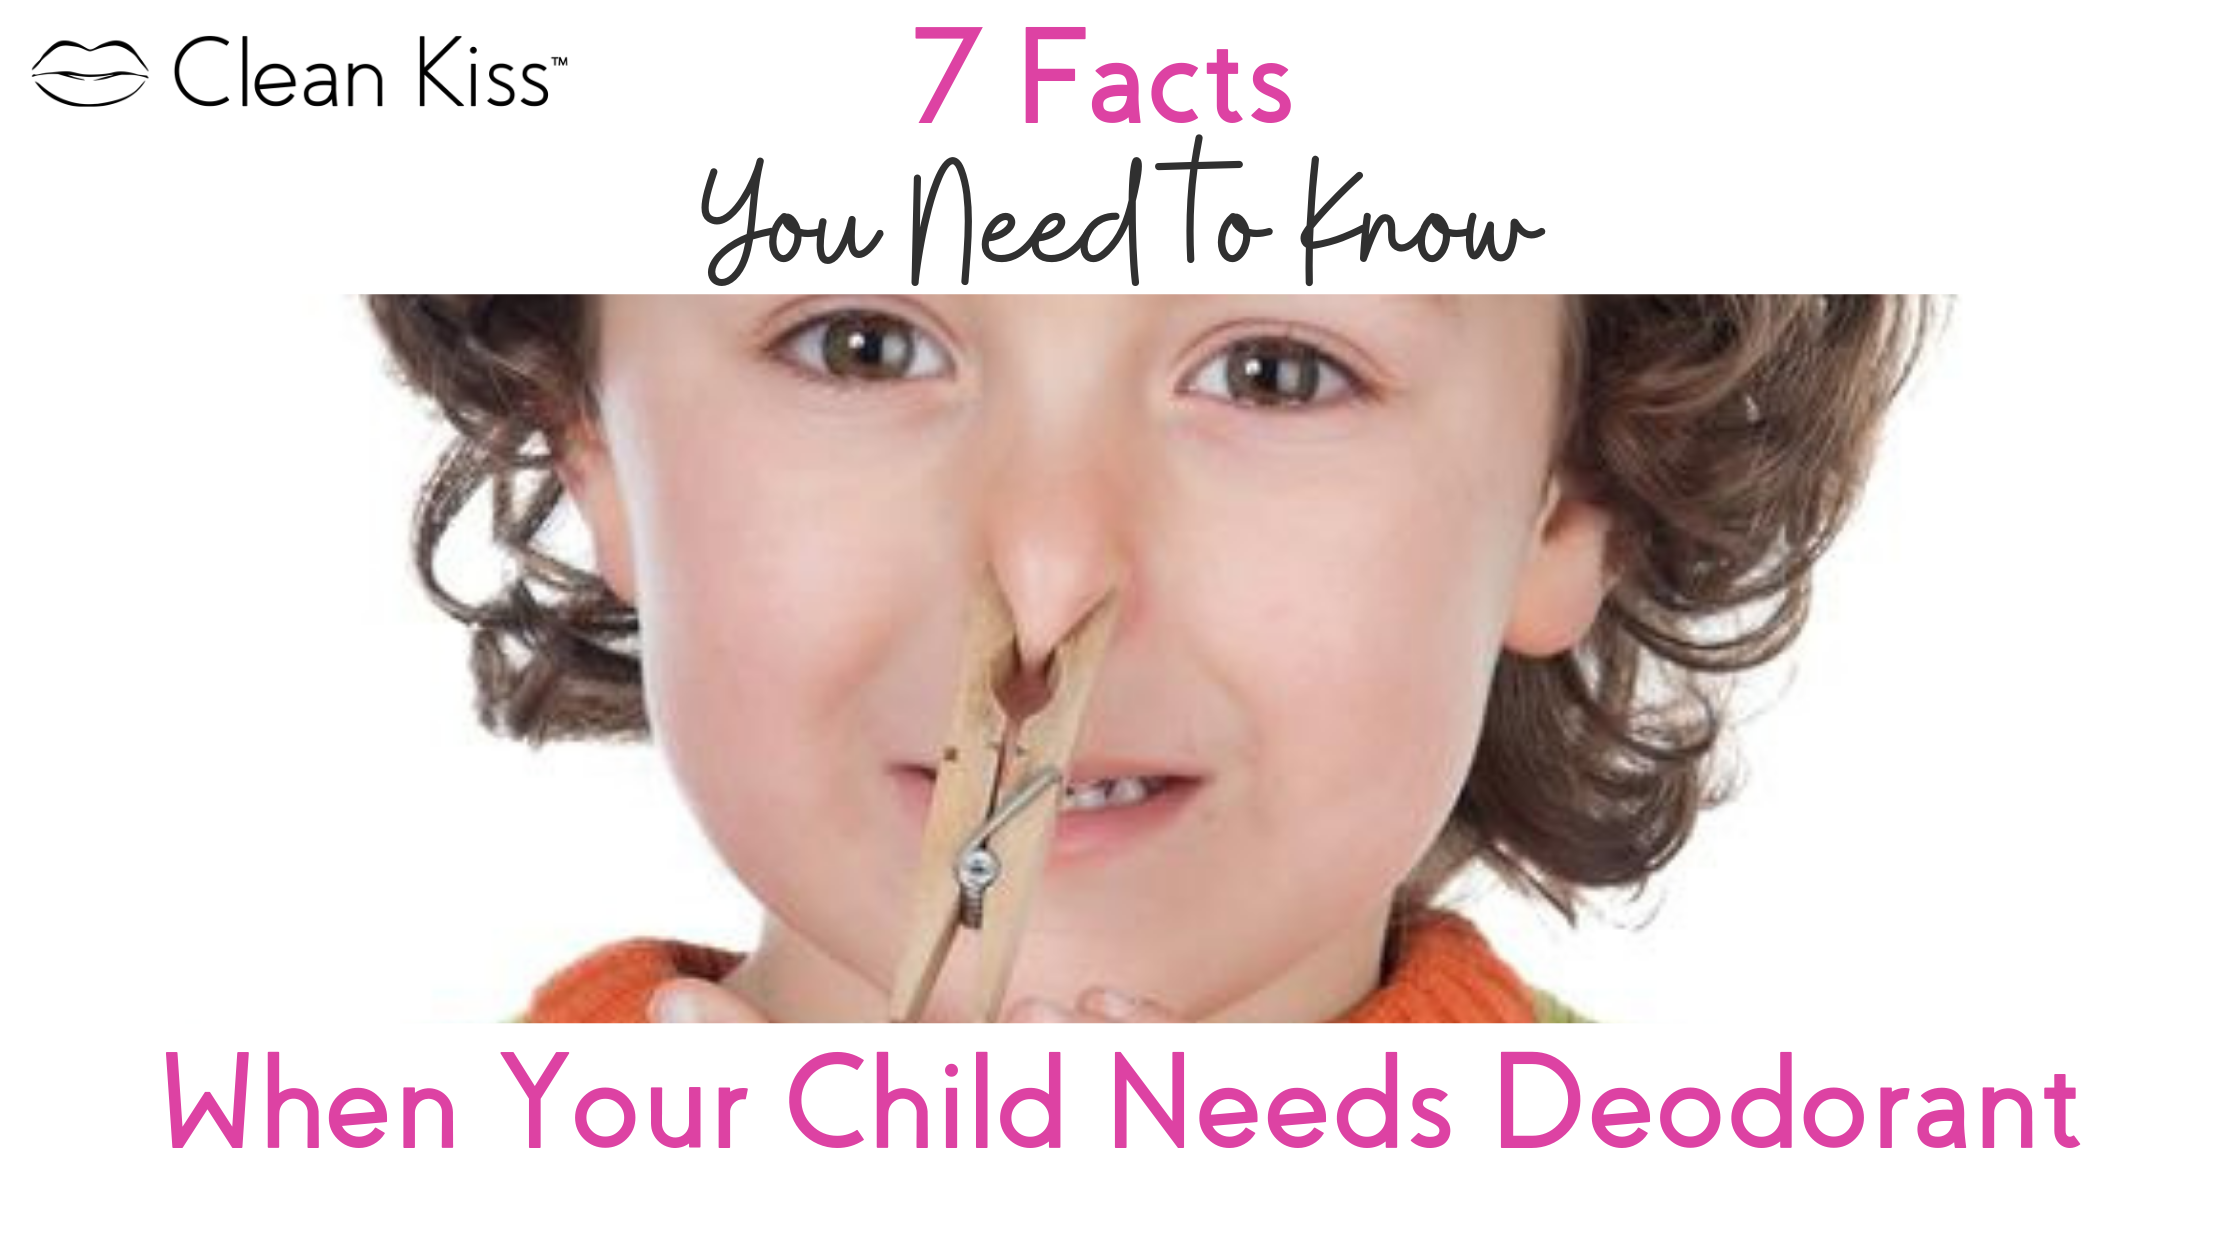 7 Facts to Know When Your Child Needs Deodorant - 2021 Update